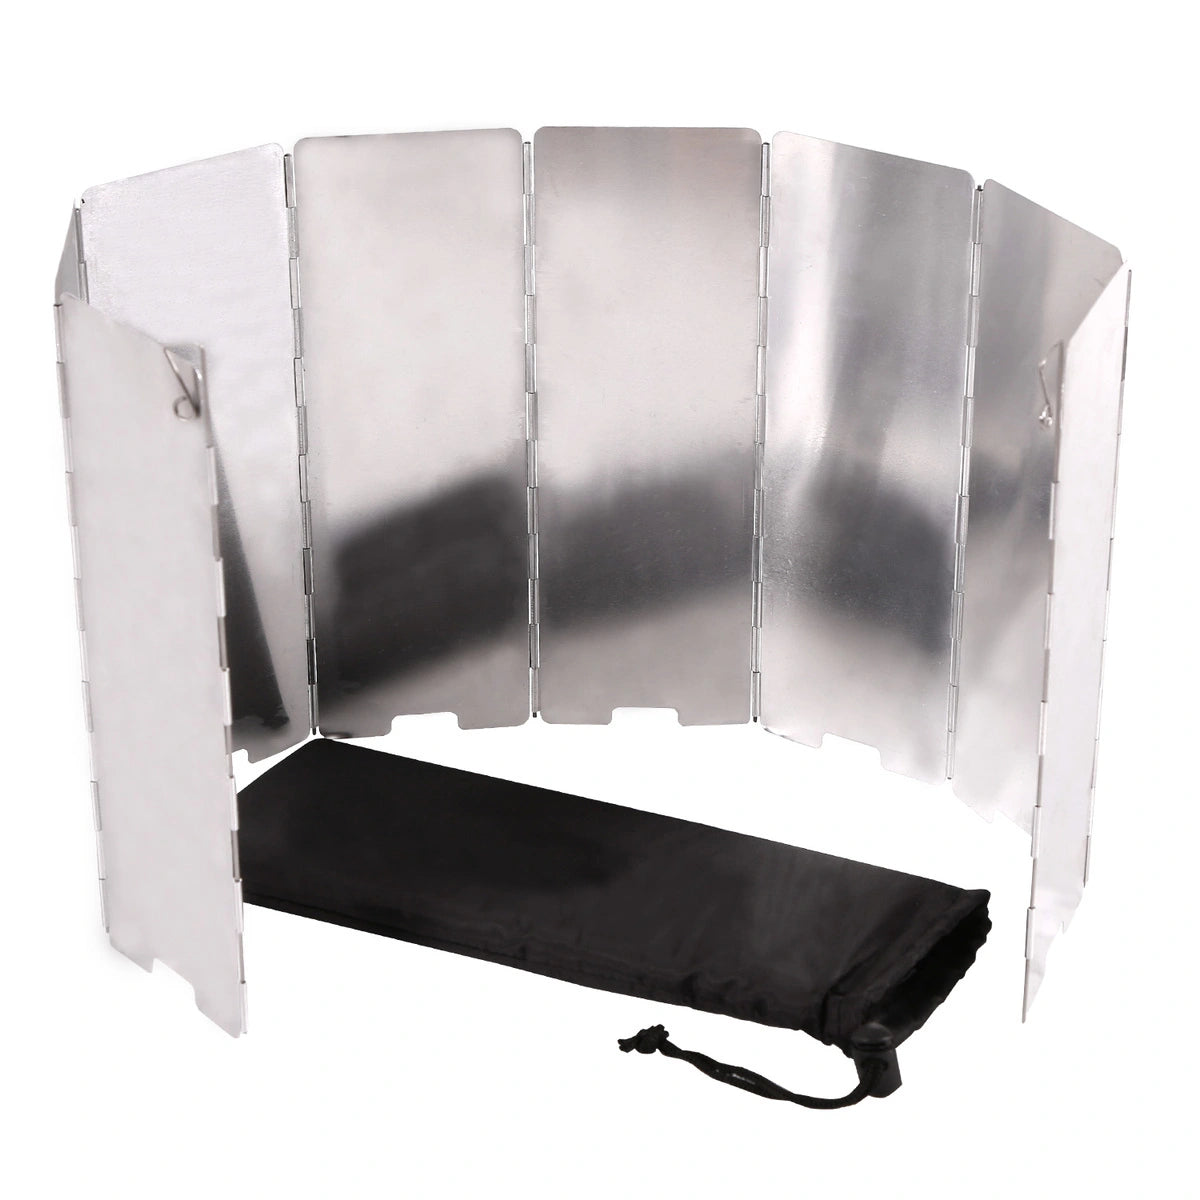 Folding Outdoor Stove Windscreen,9/10/12 Plates